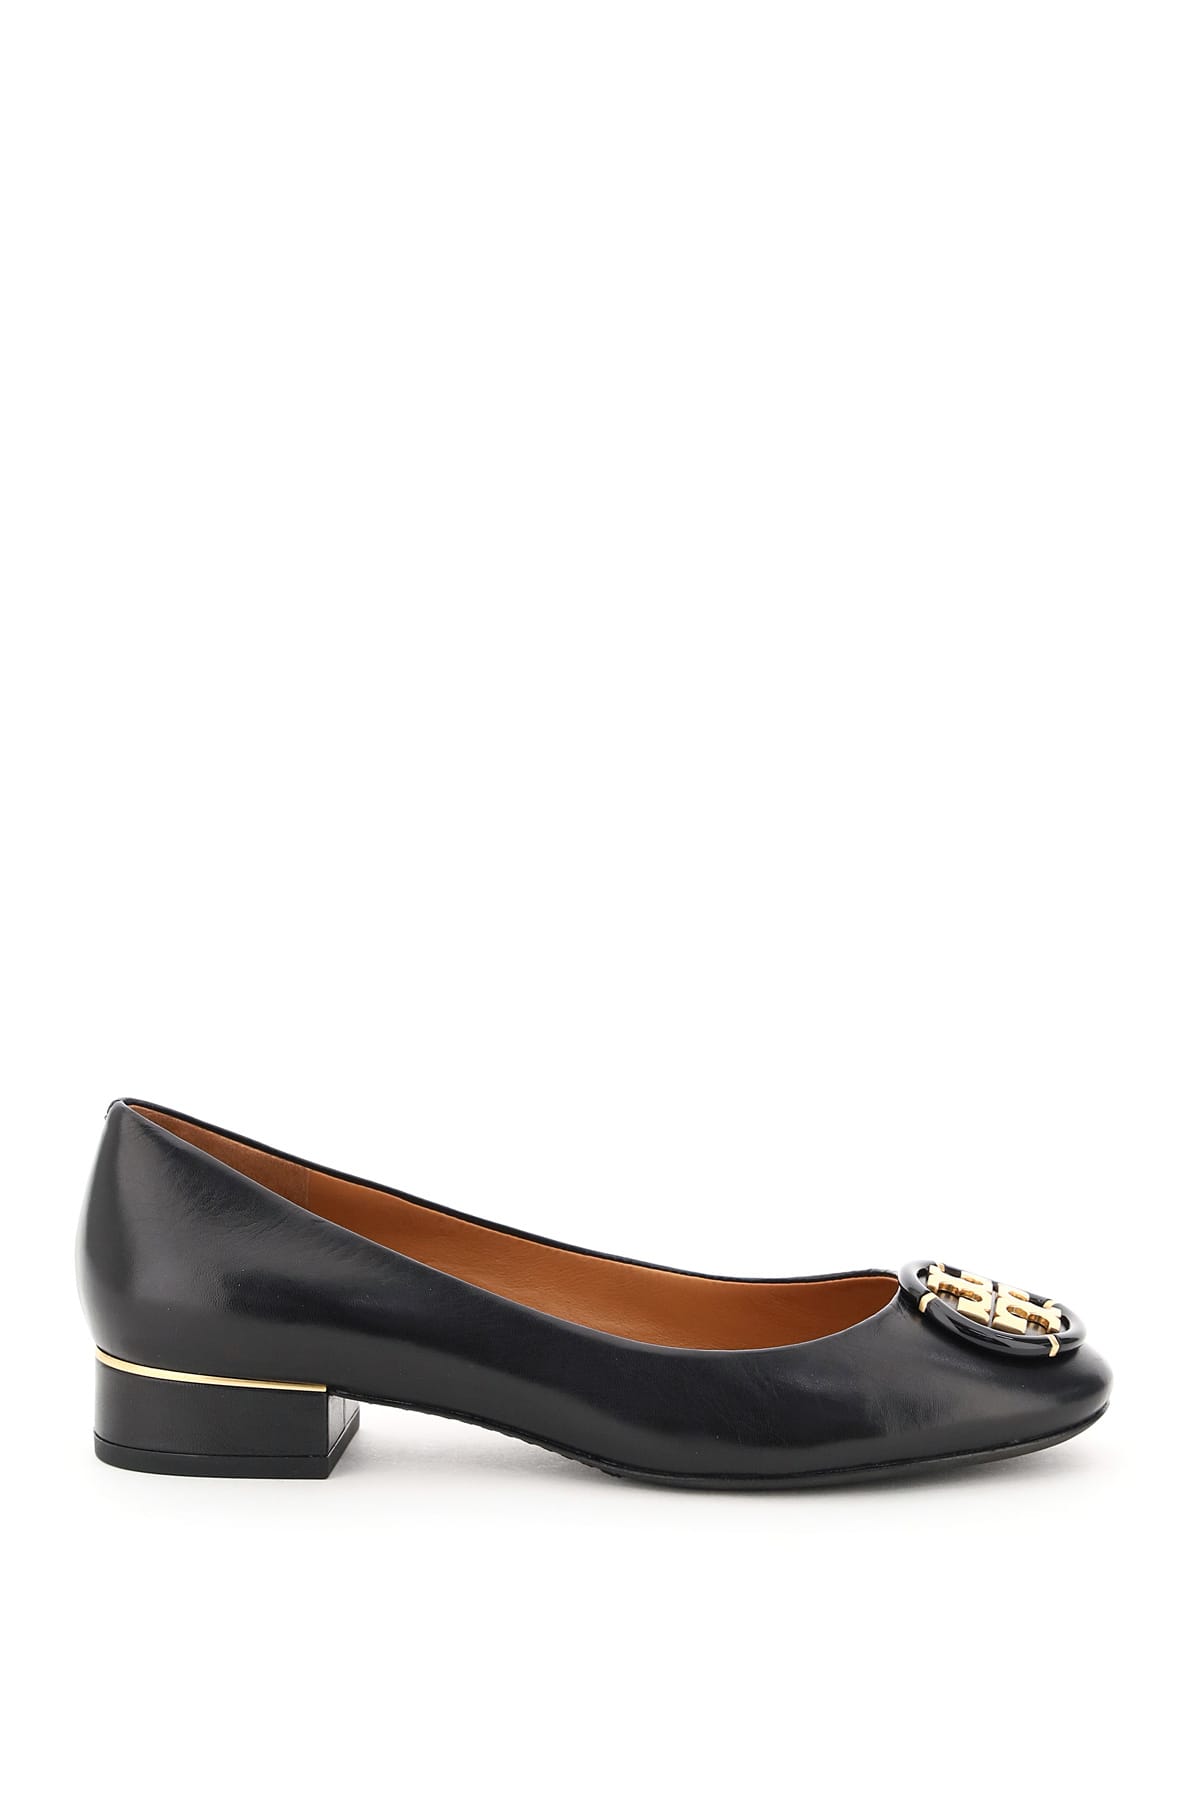 Tory Burch Leather Ballet Flats With Logo